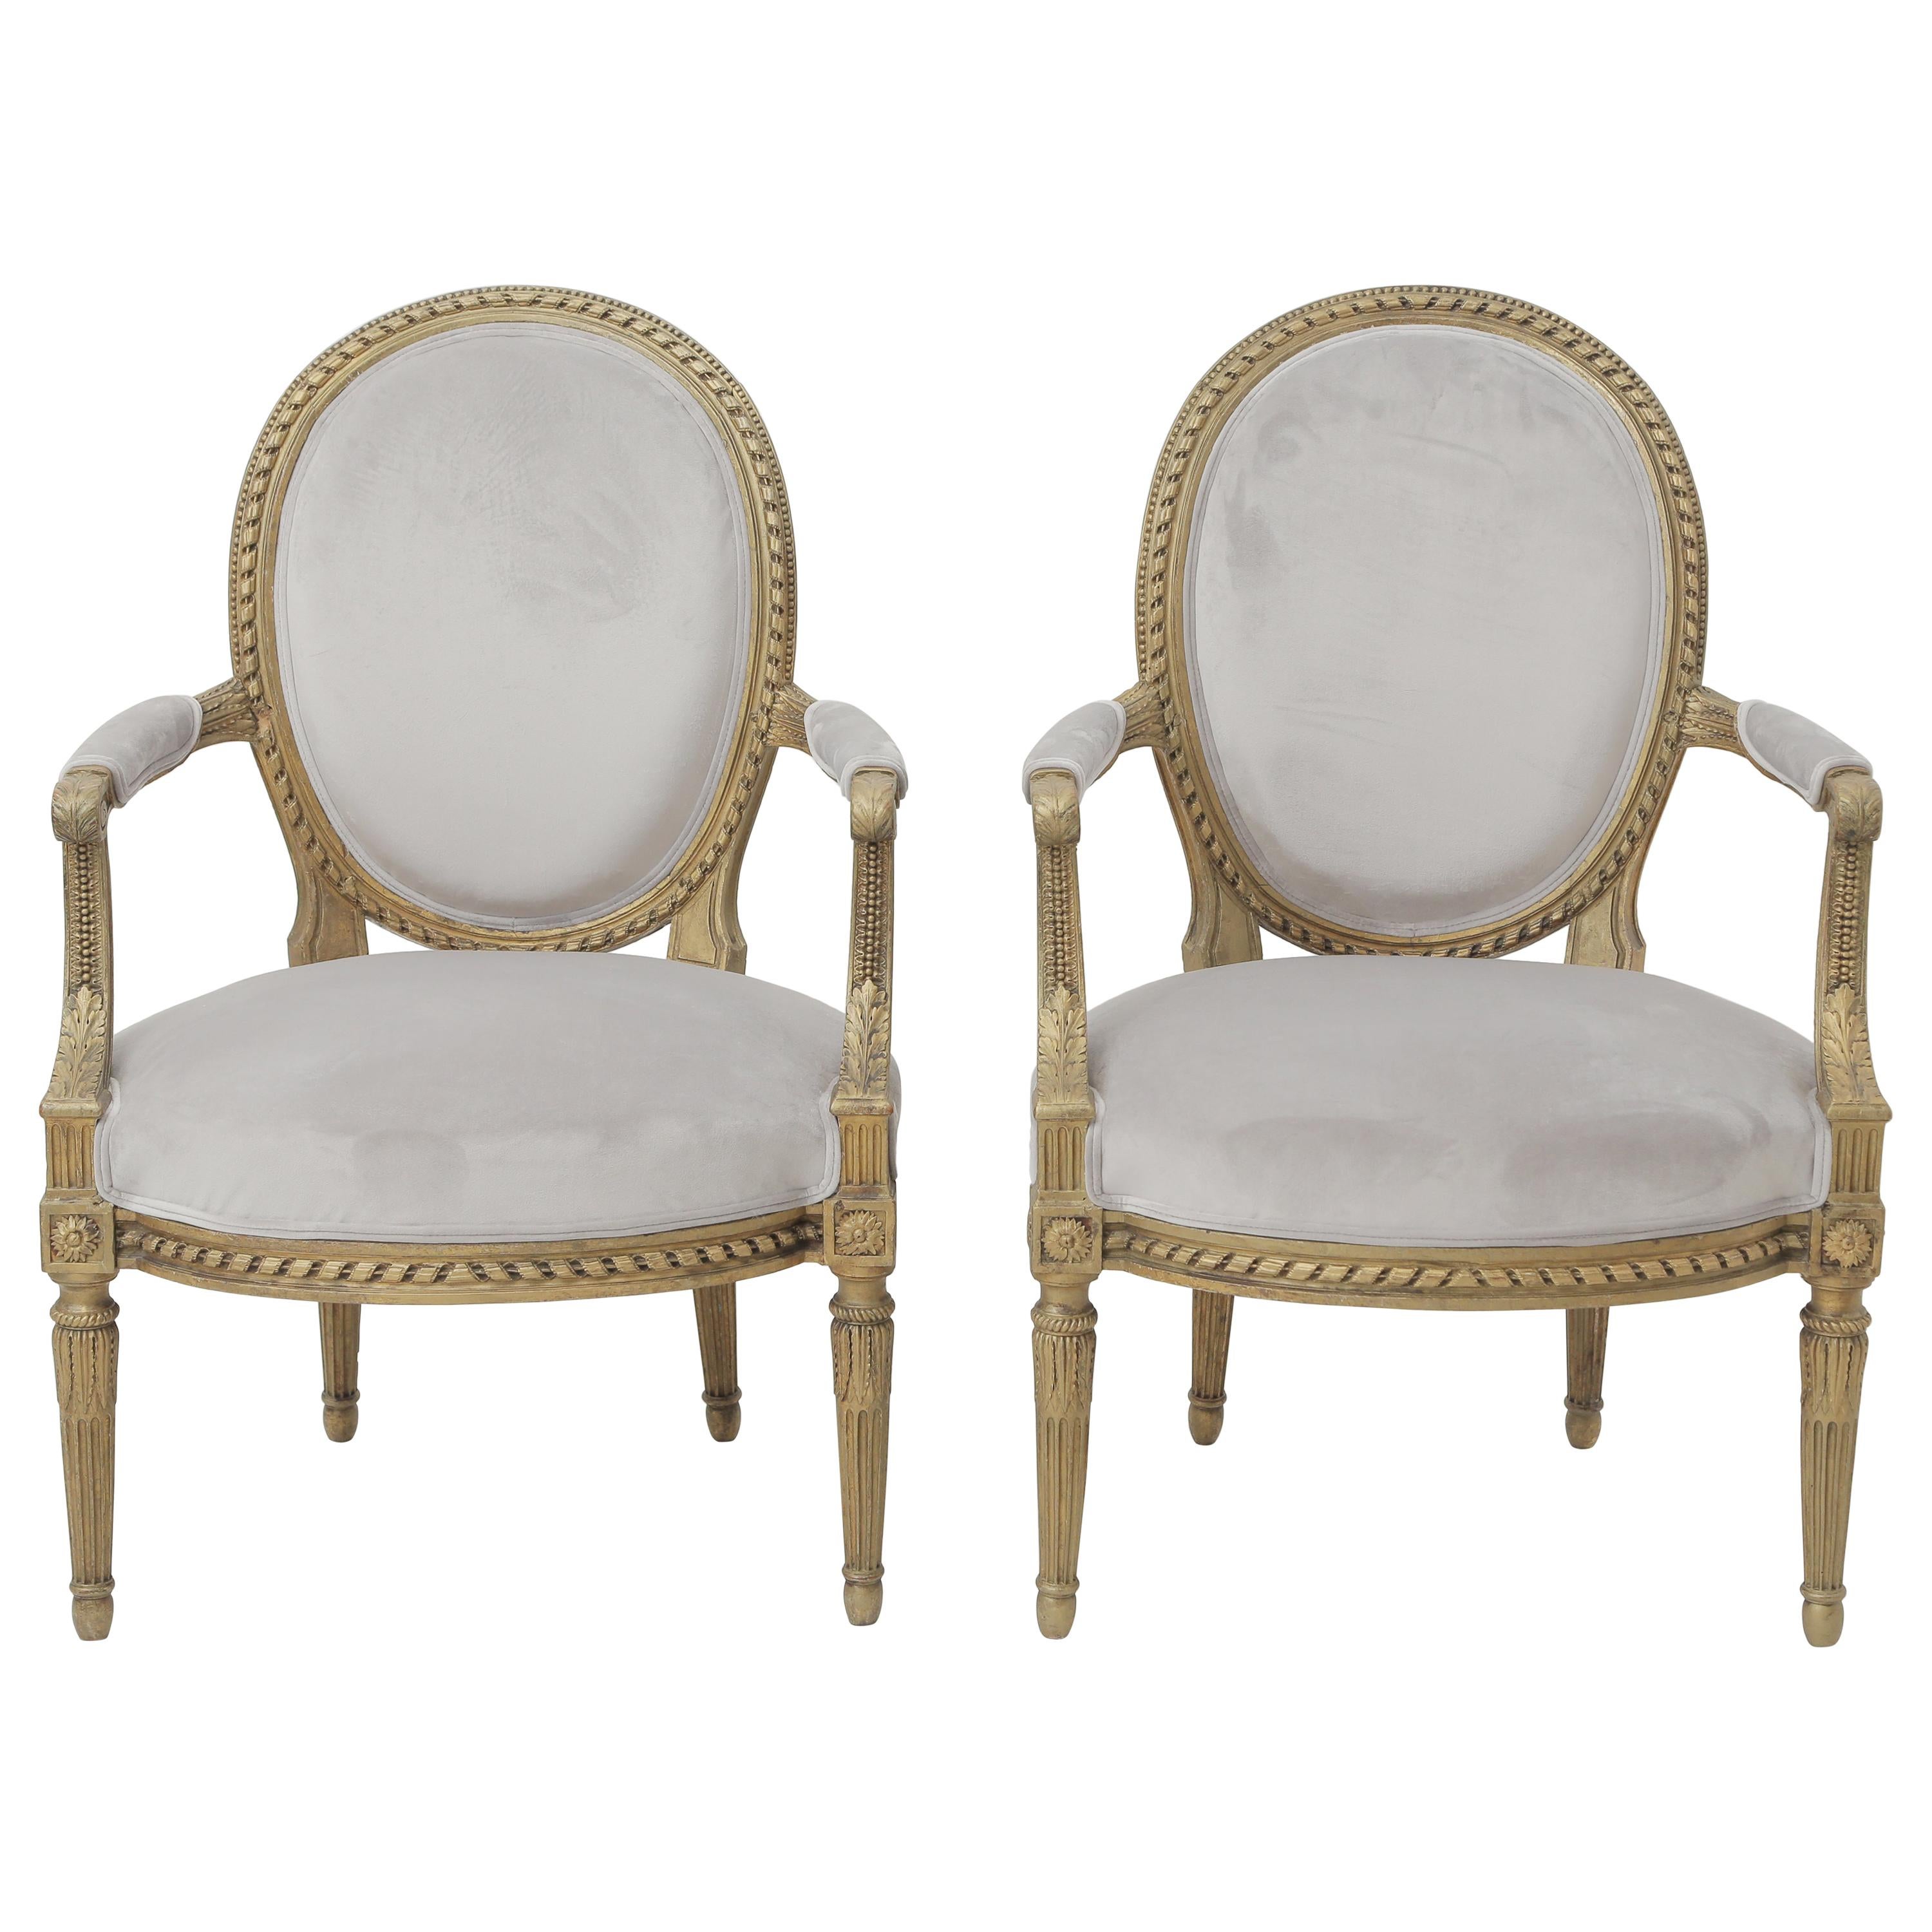 19th Century French Louis XVI Style Carved Giltwood & Pale Grey Suede Armchairs